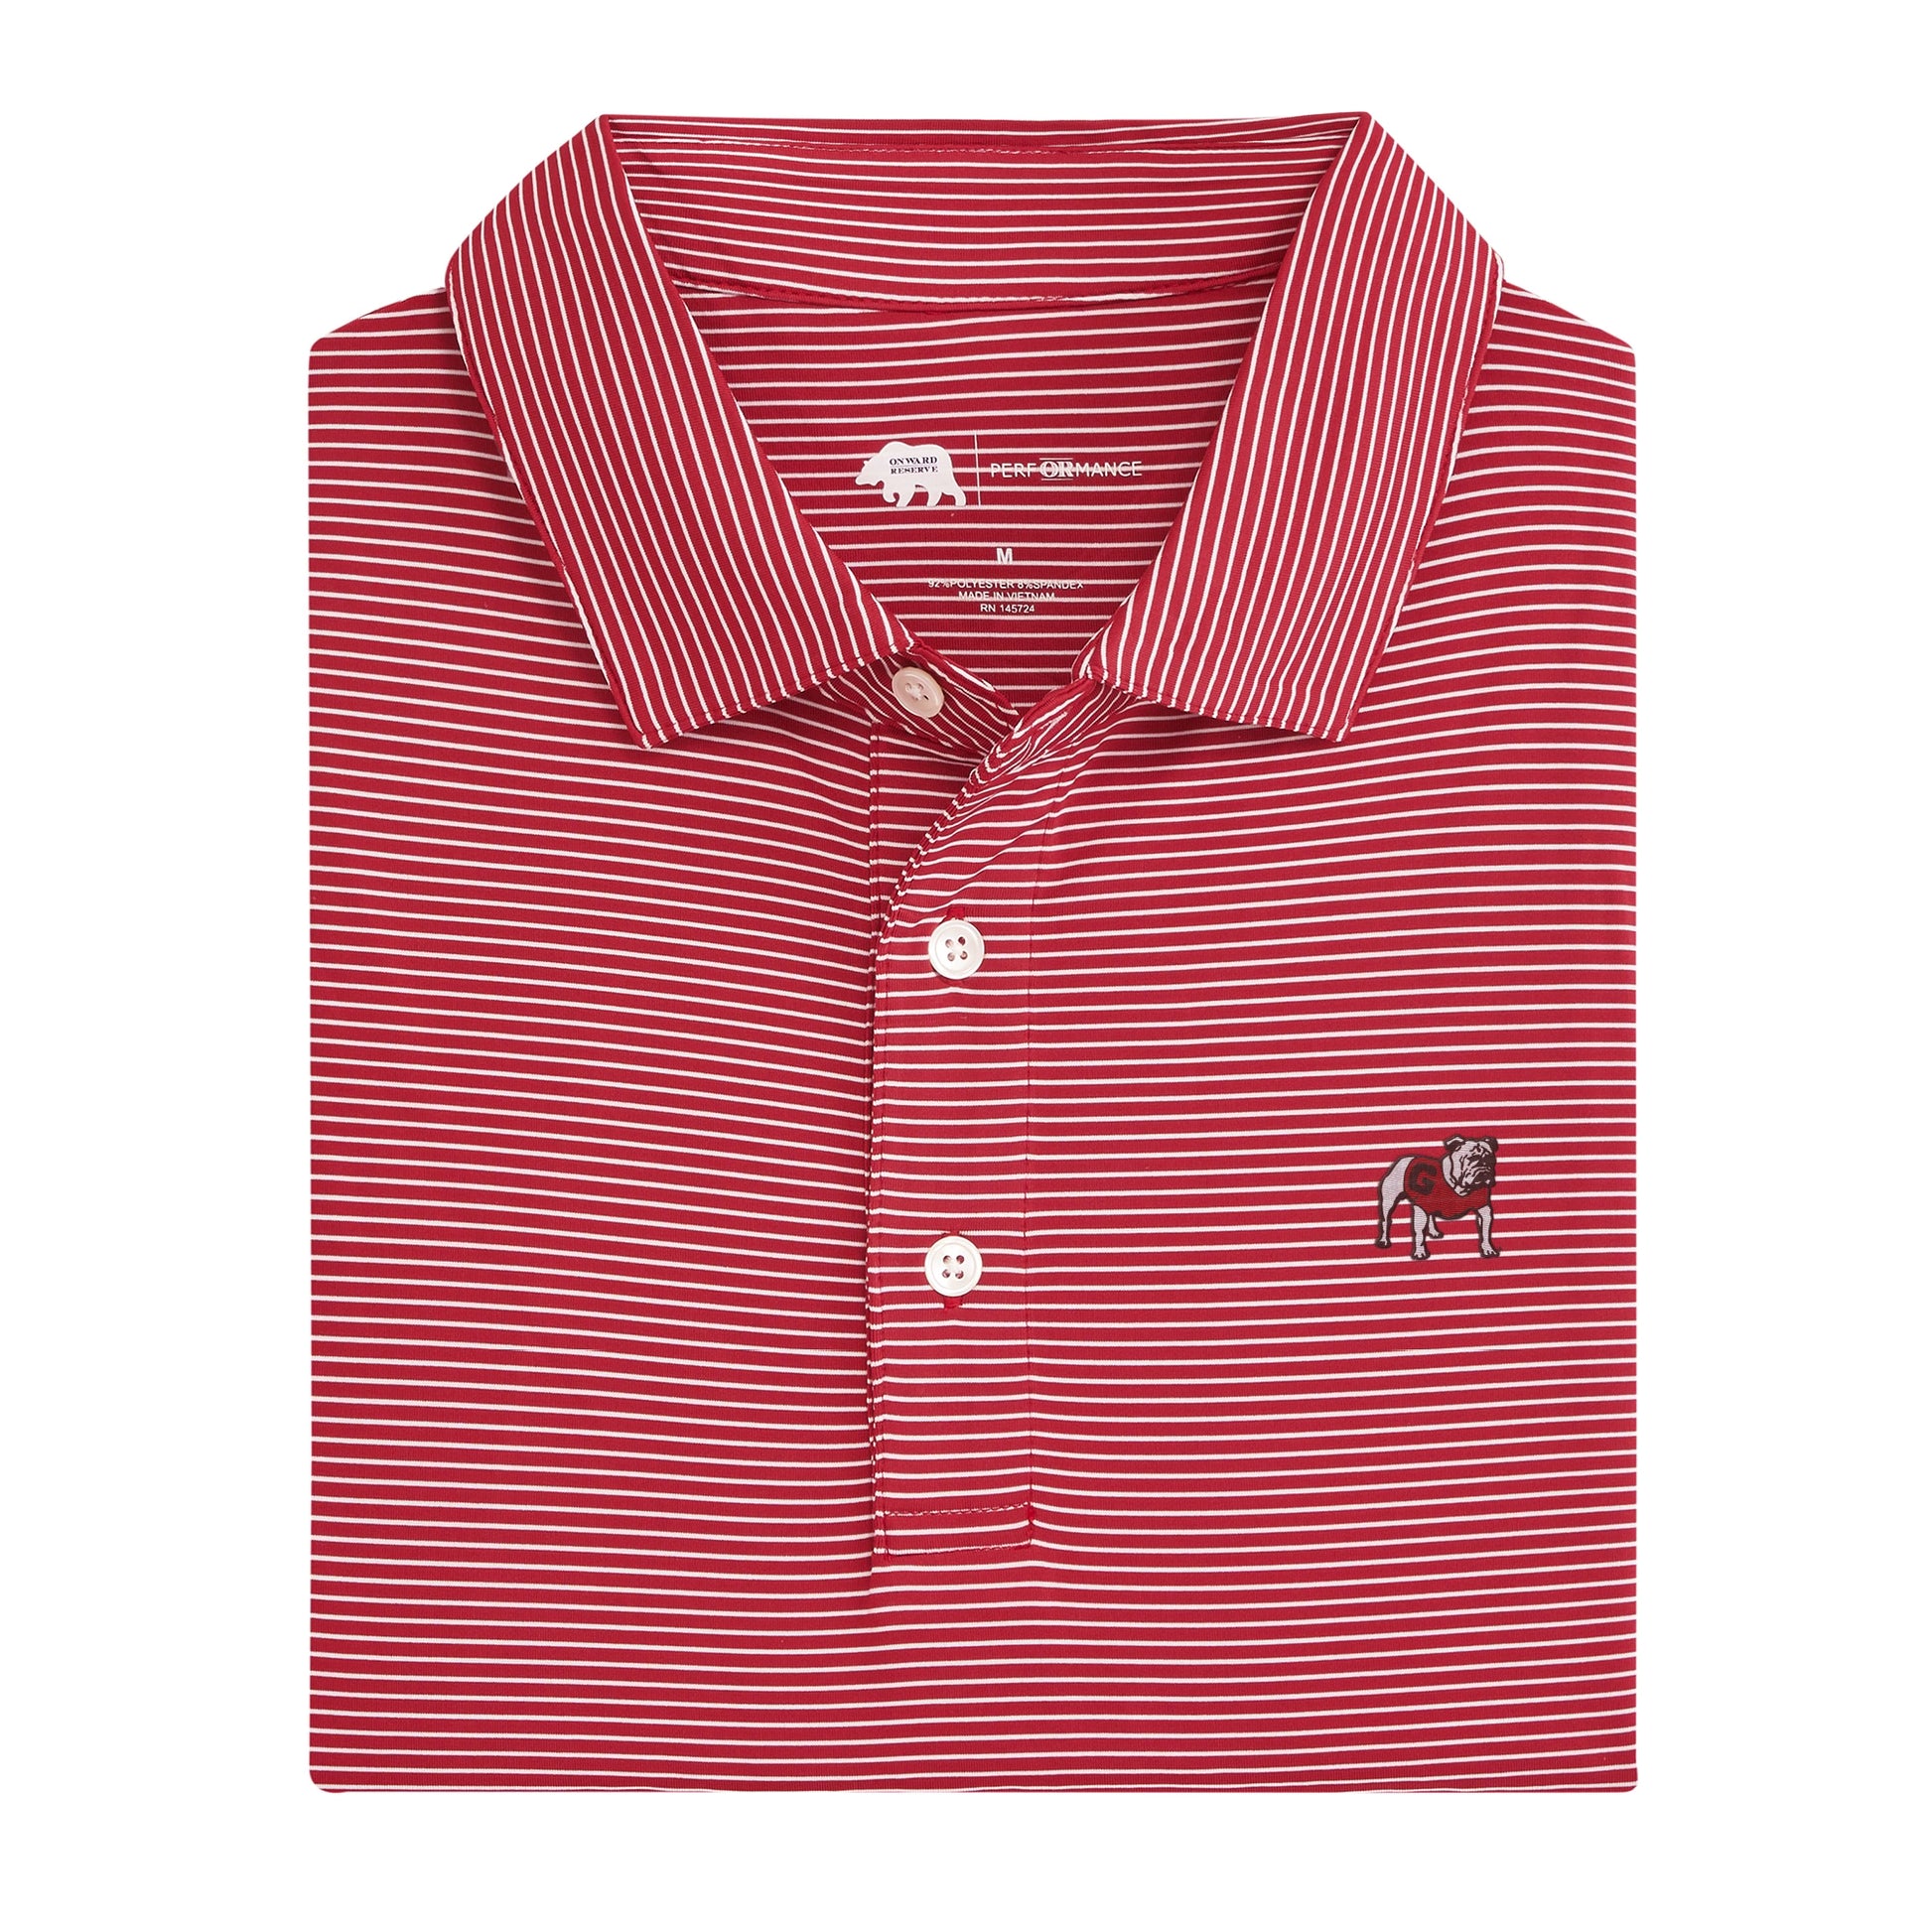 Onward Reserve Fairway Striped Performance Polo Red – Clover